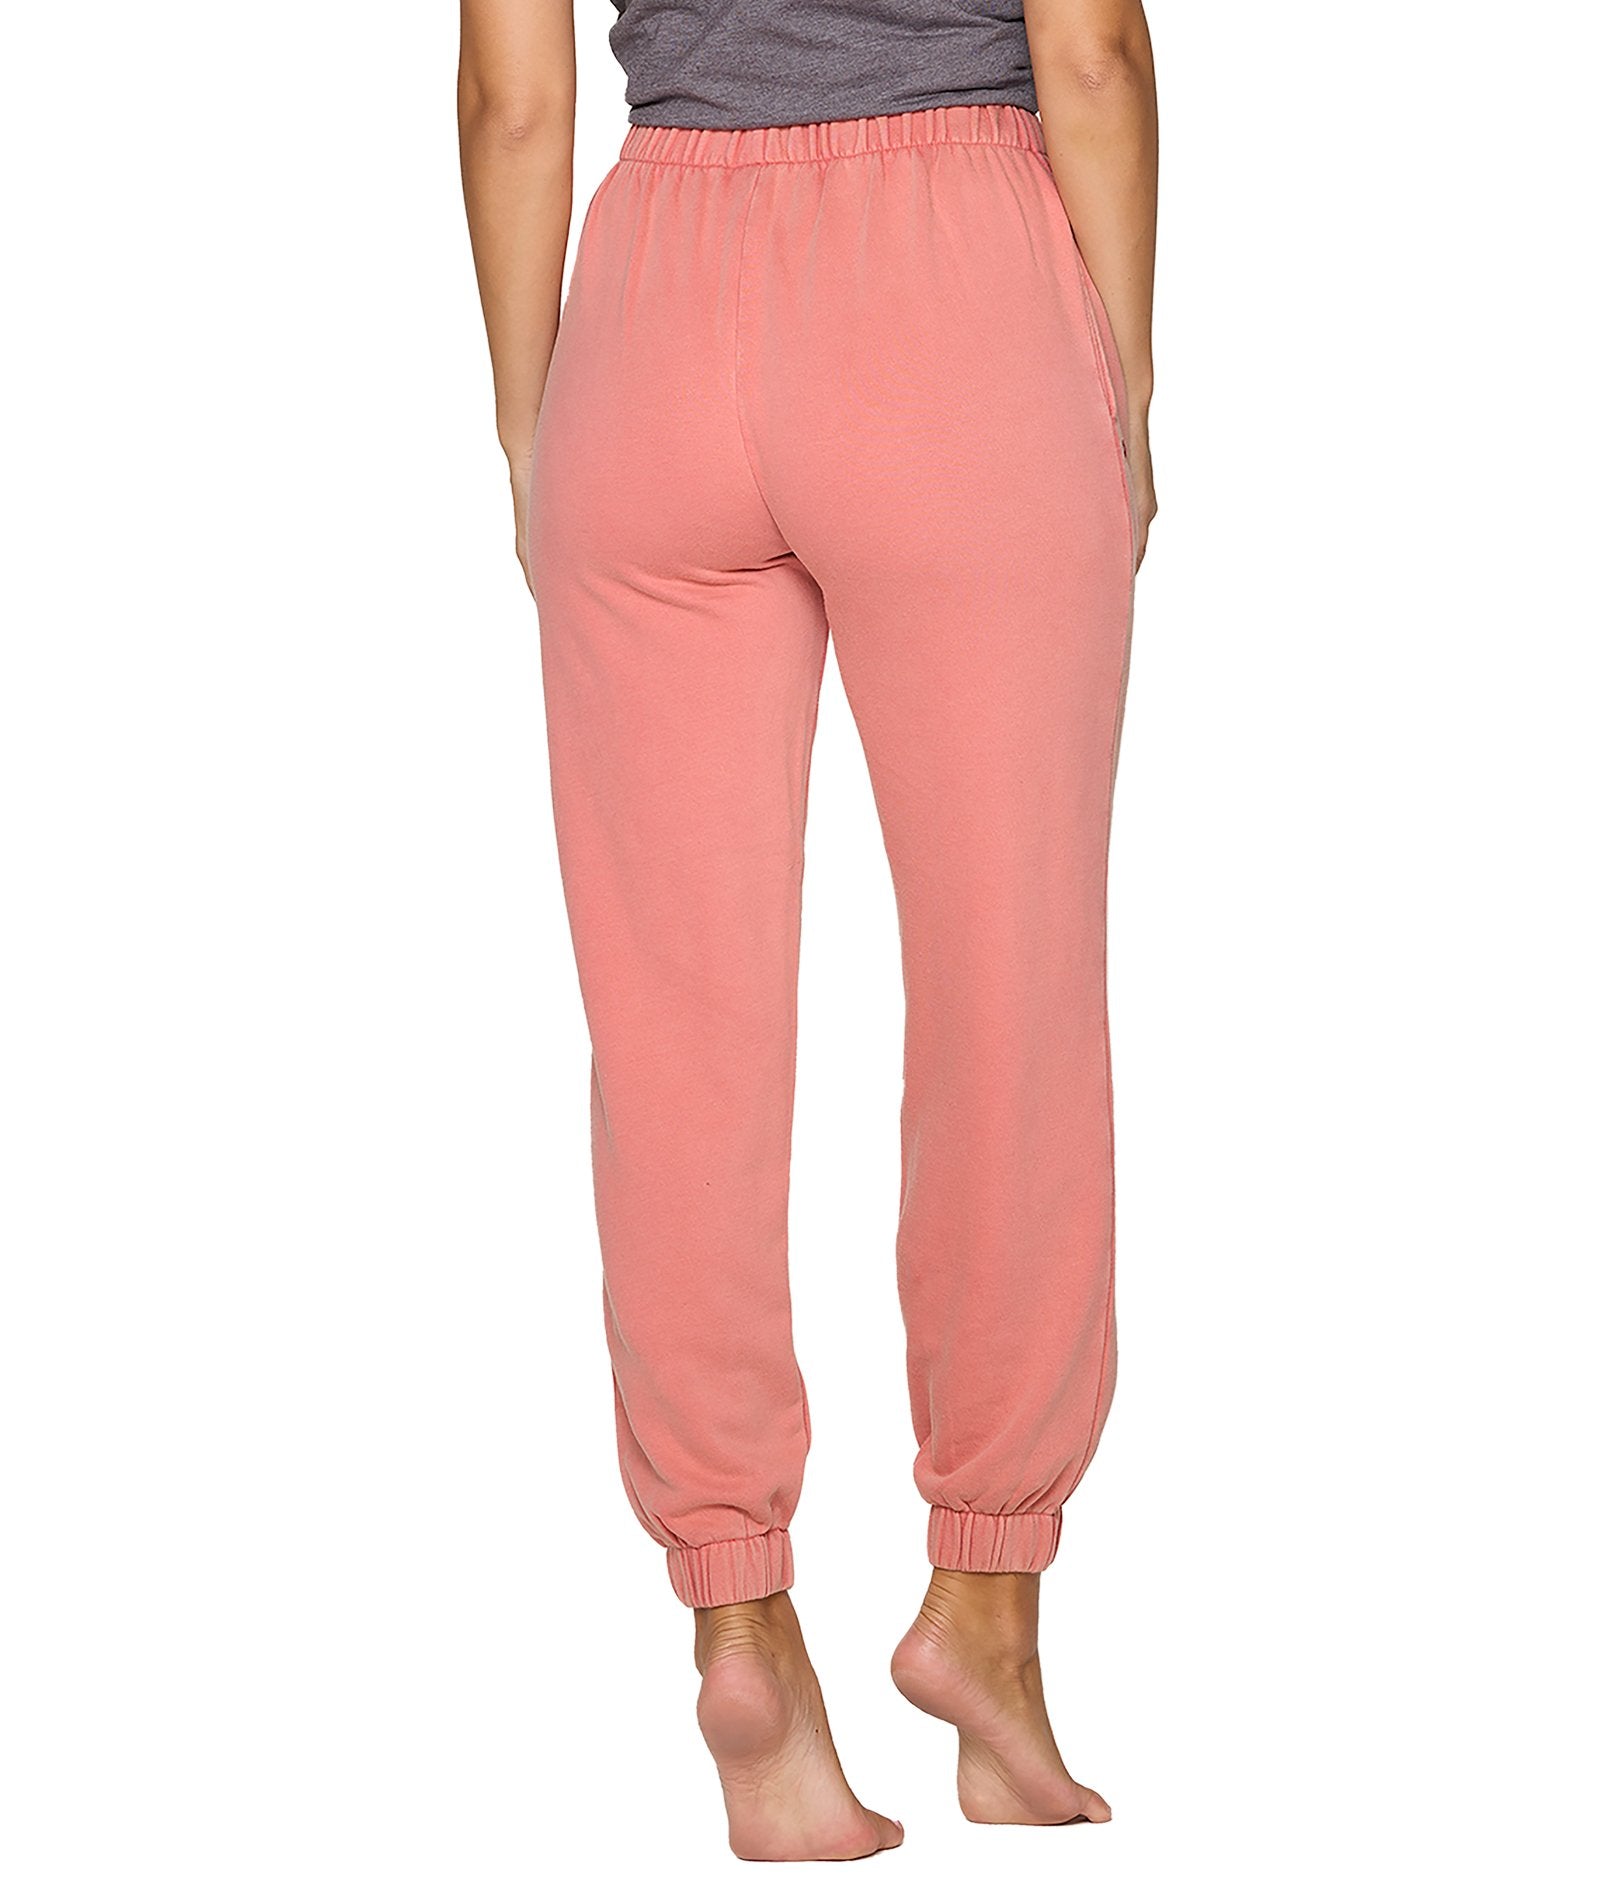 Women's Mineral Red Aubrey Washed Jogger